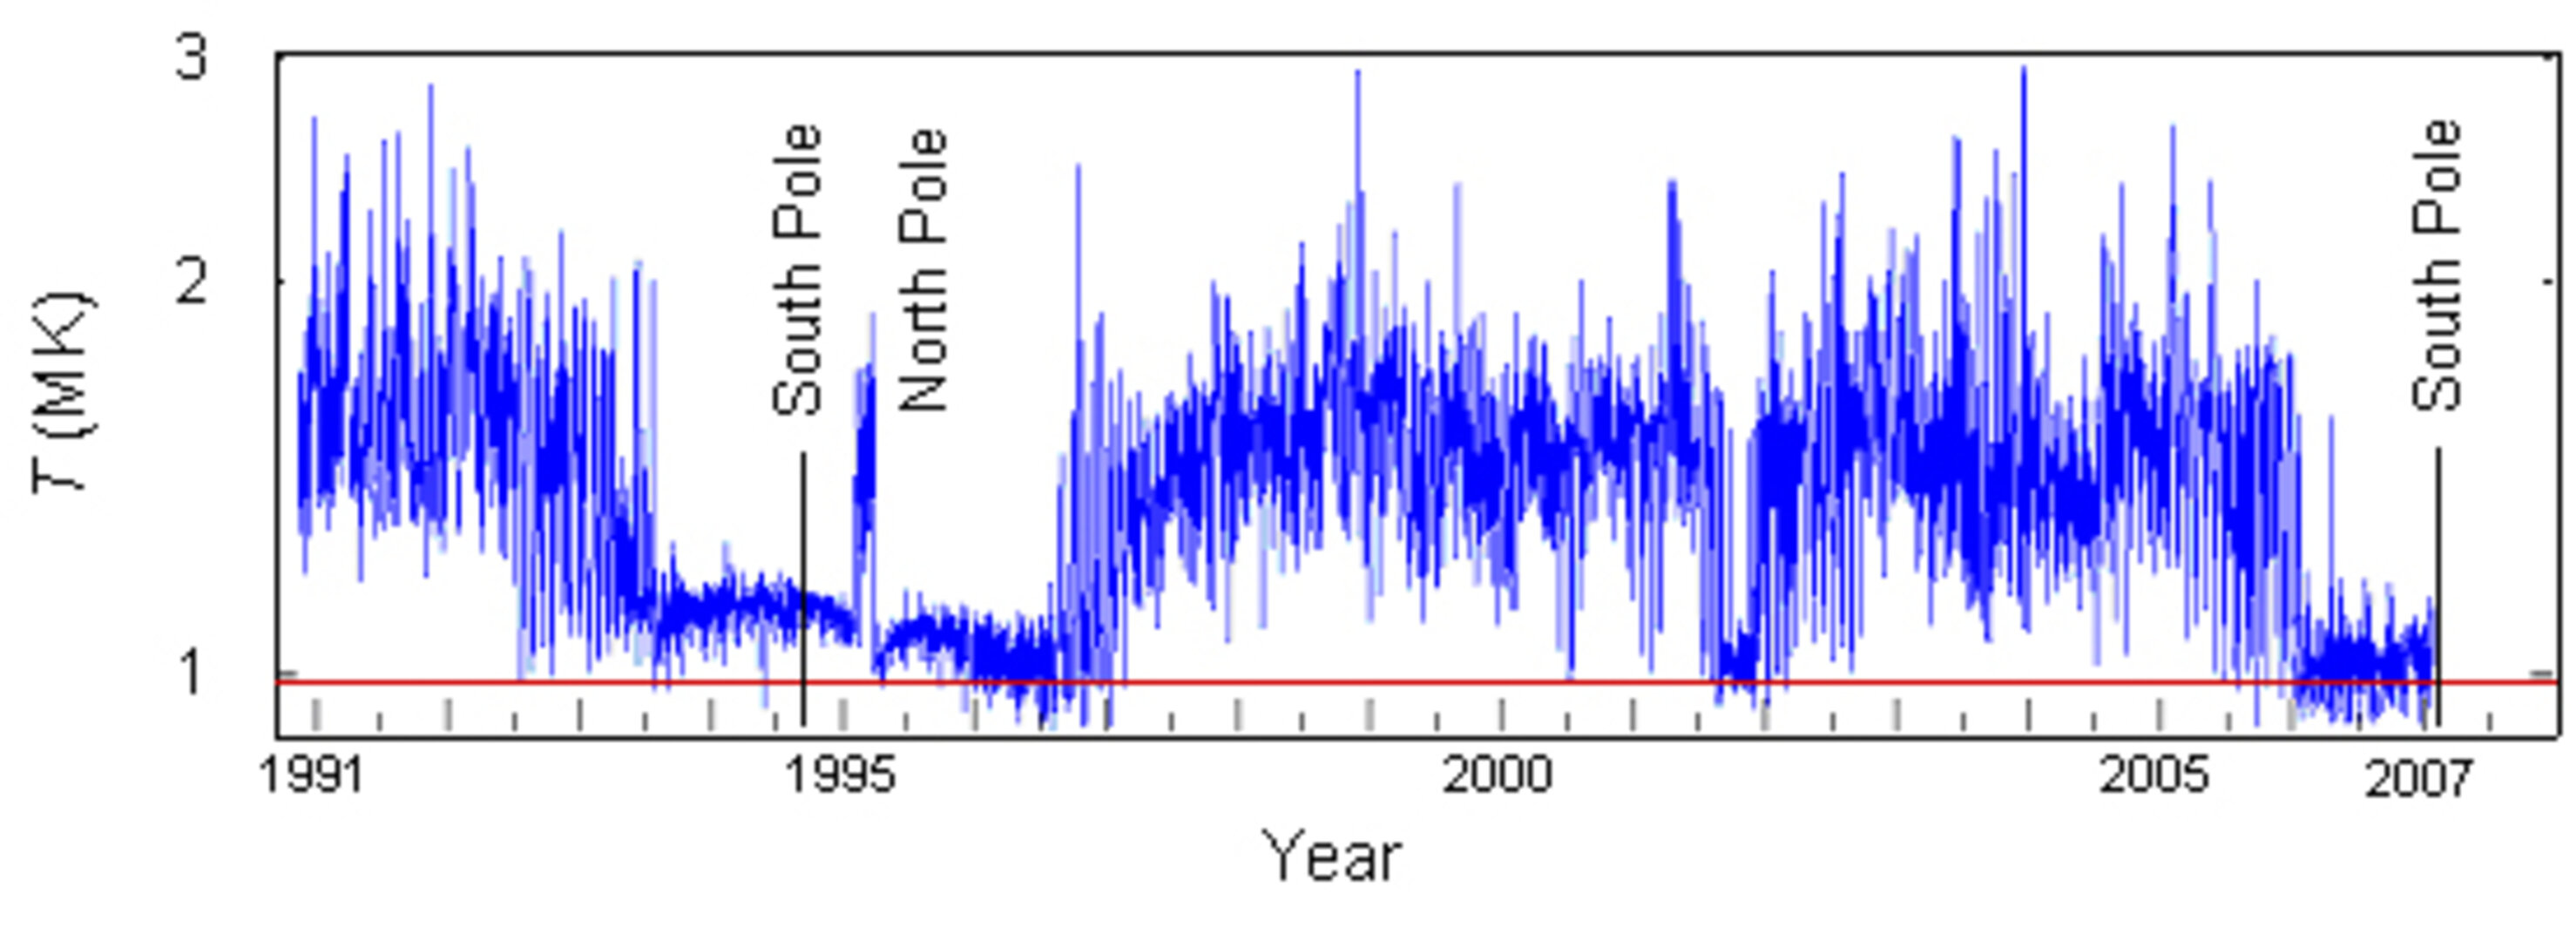 Temperature of the Sun’s polar coronal holes as measured by Ulysses